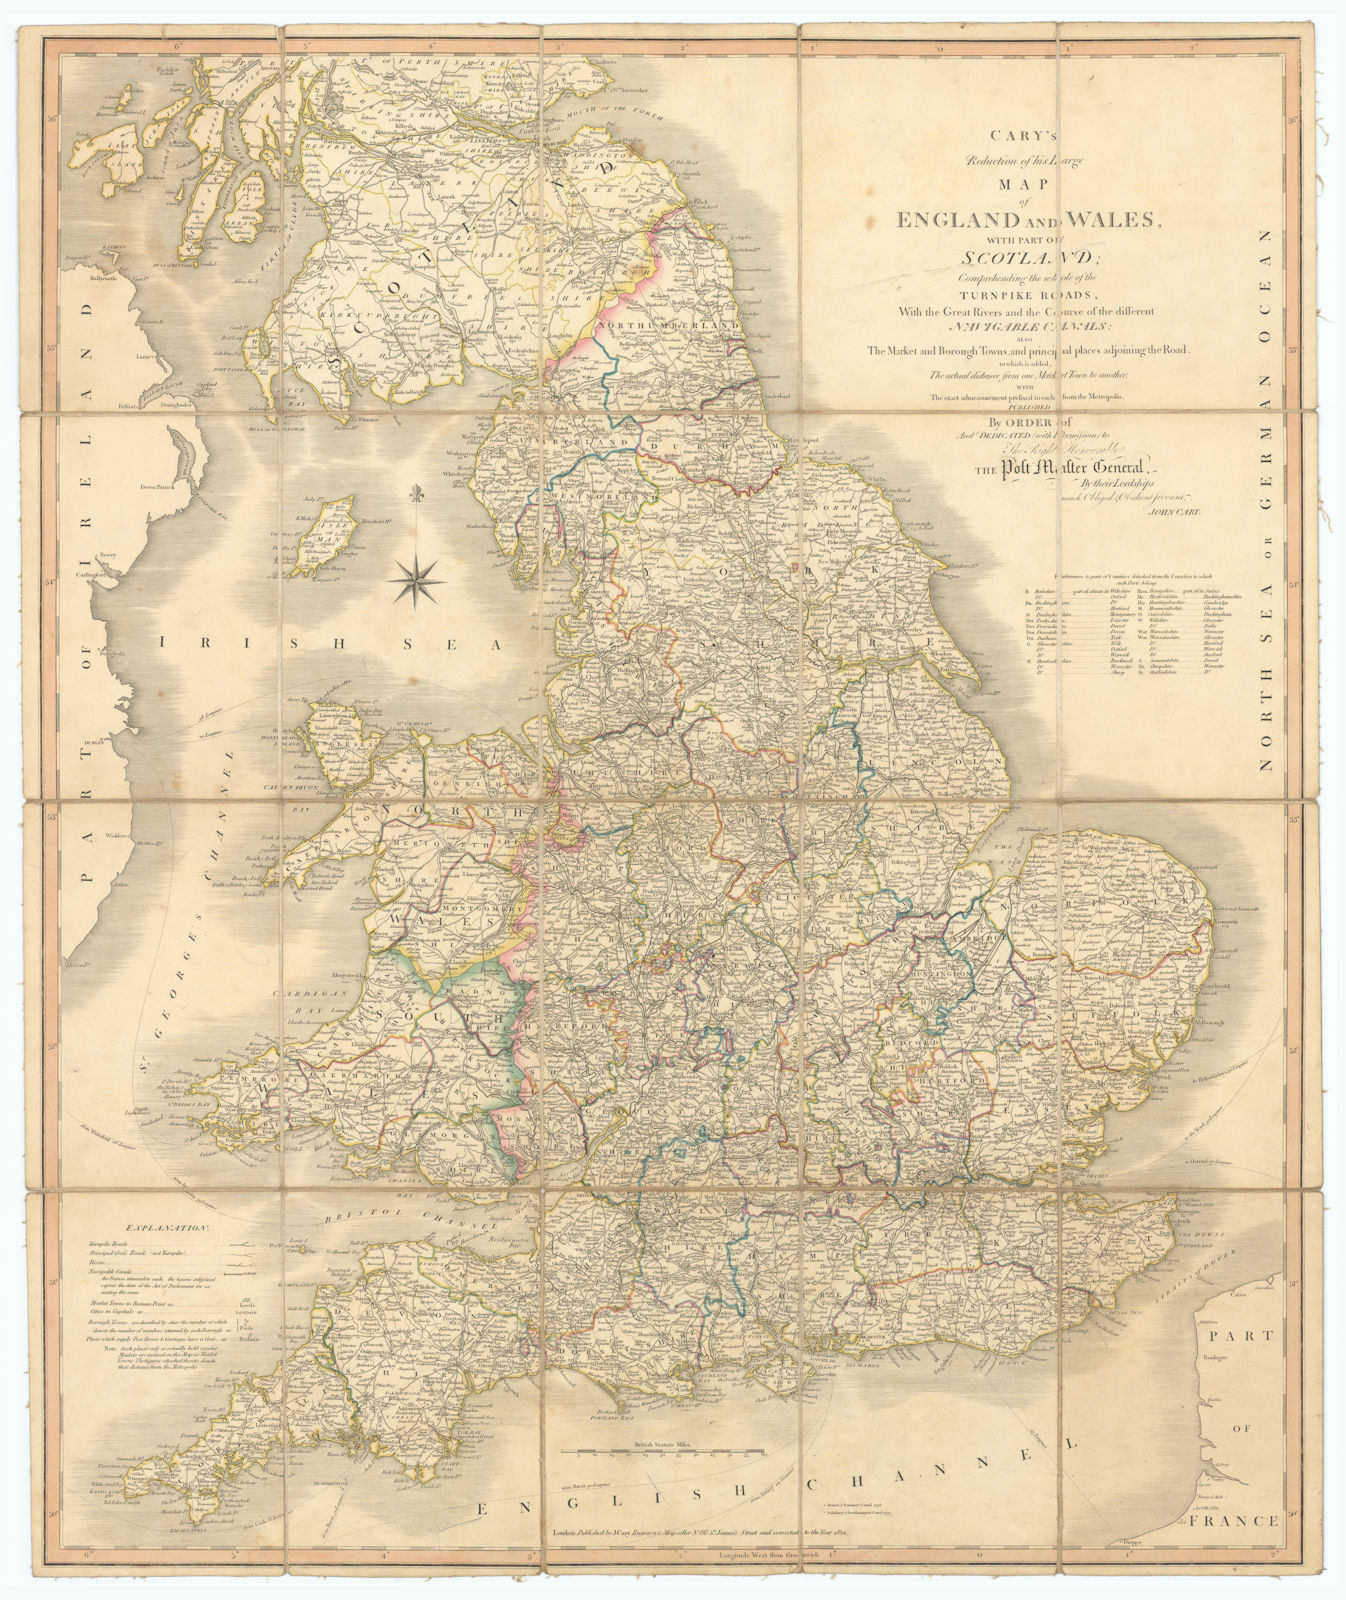 'Cary's reduction of his large map of England & Wales'. Turnpikes canals &c 1821